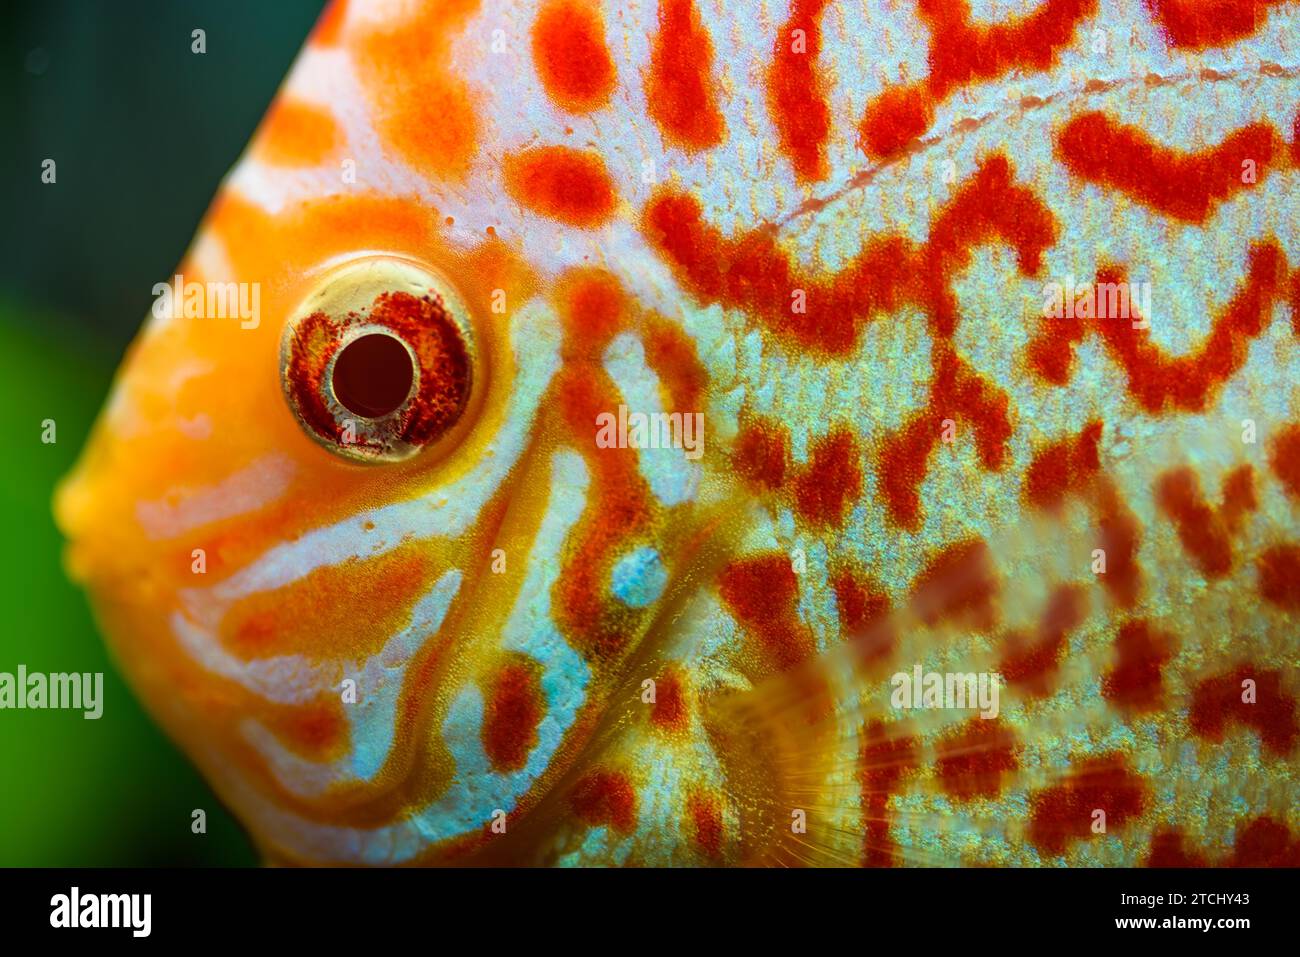 Colorful fish from the spieces discus (Symphysodon) in aquarium. Freshwater aquaria concept Stock Photo